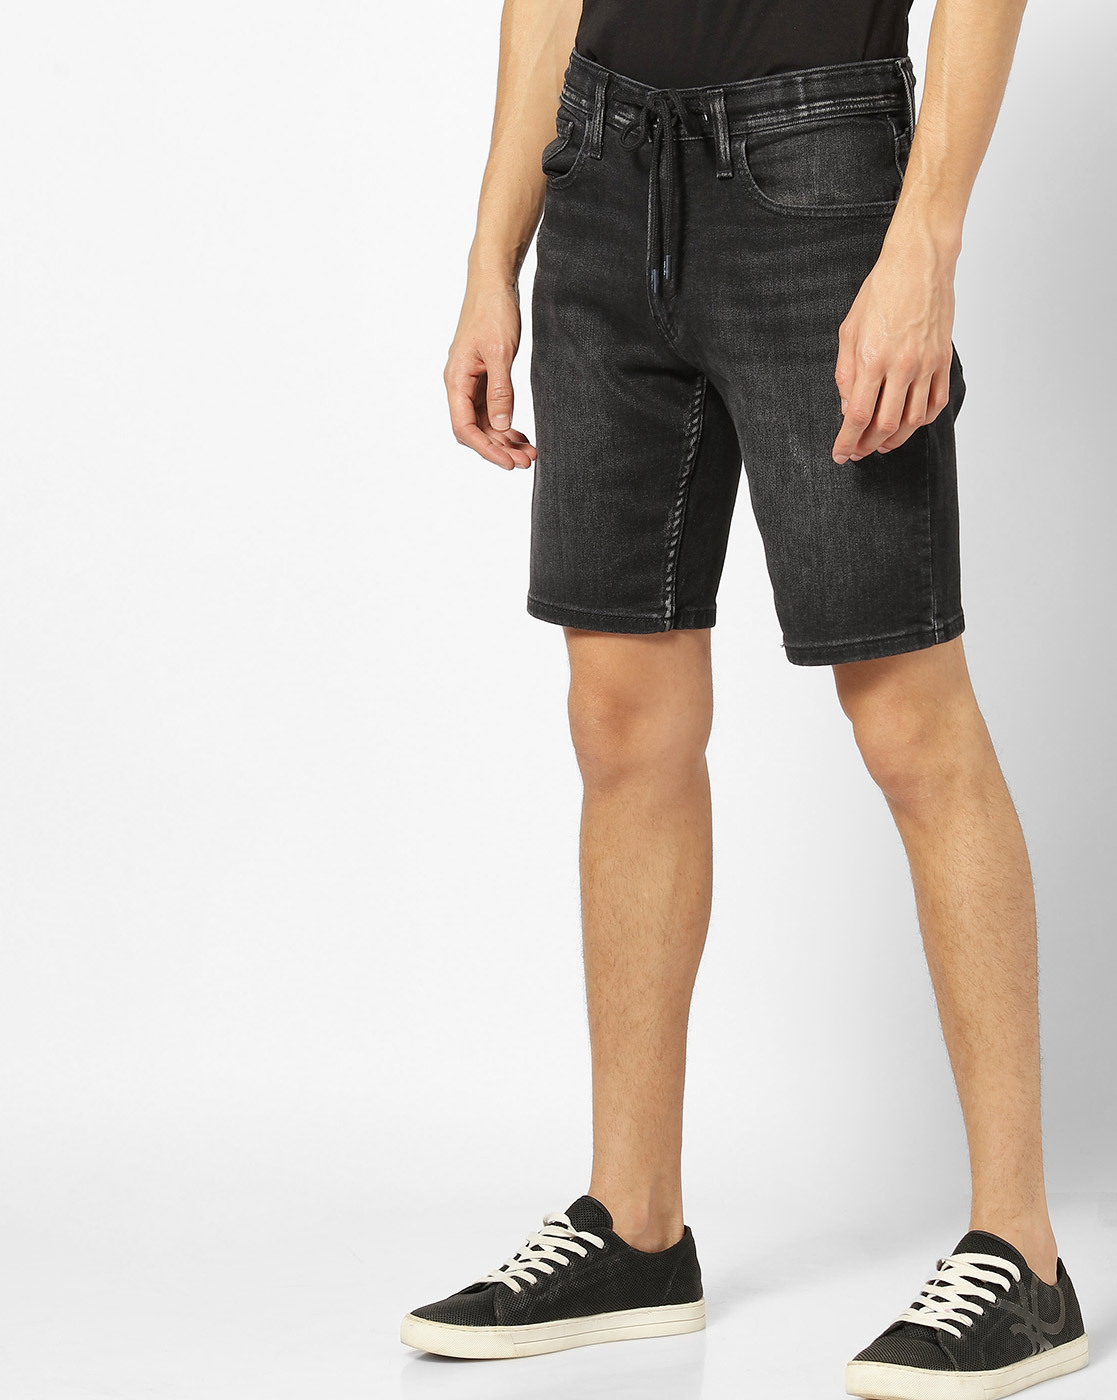 Buy Black Shorts & 3/4ths for Men by LEVIS Online 